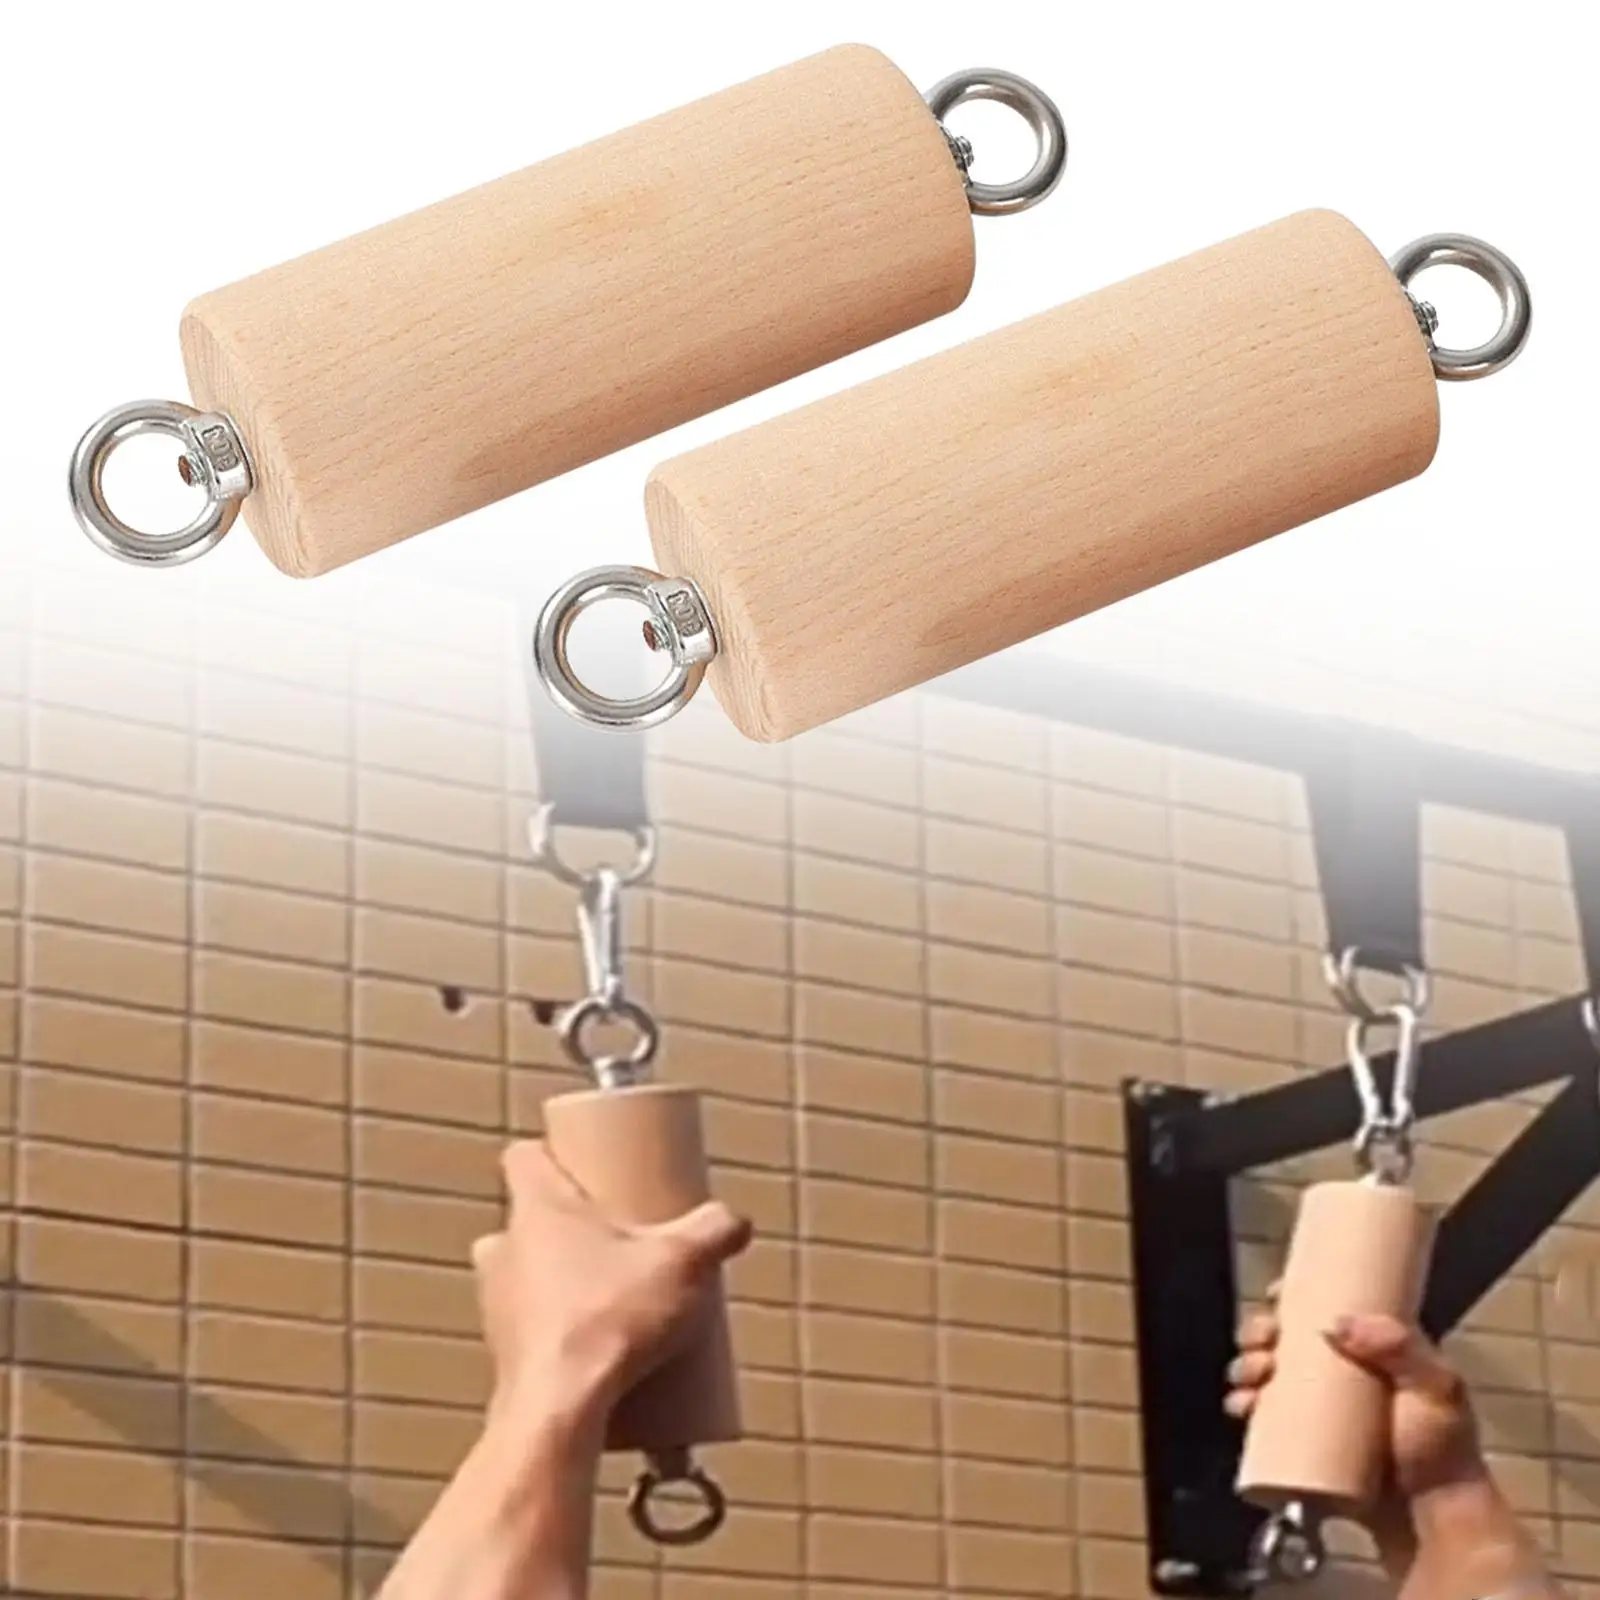 

Pull up Handles Grips, Wood Rock Climbing Holds Hand Grip Handle Hold Grips for Home Workout, Arm Strength Training